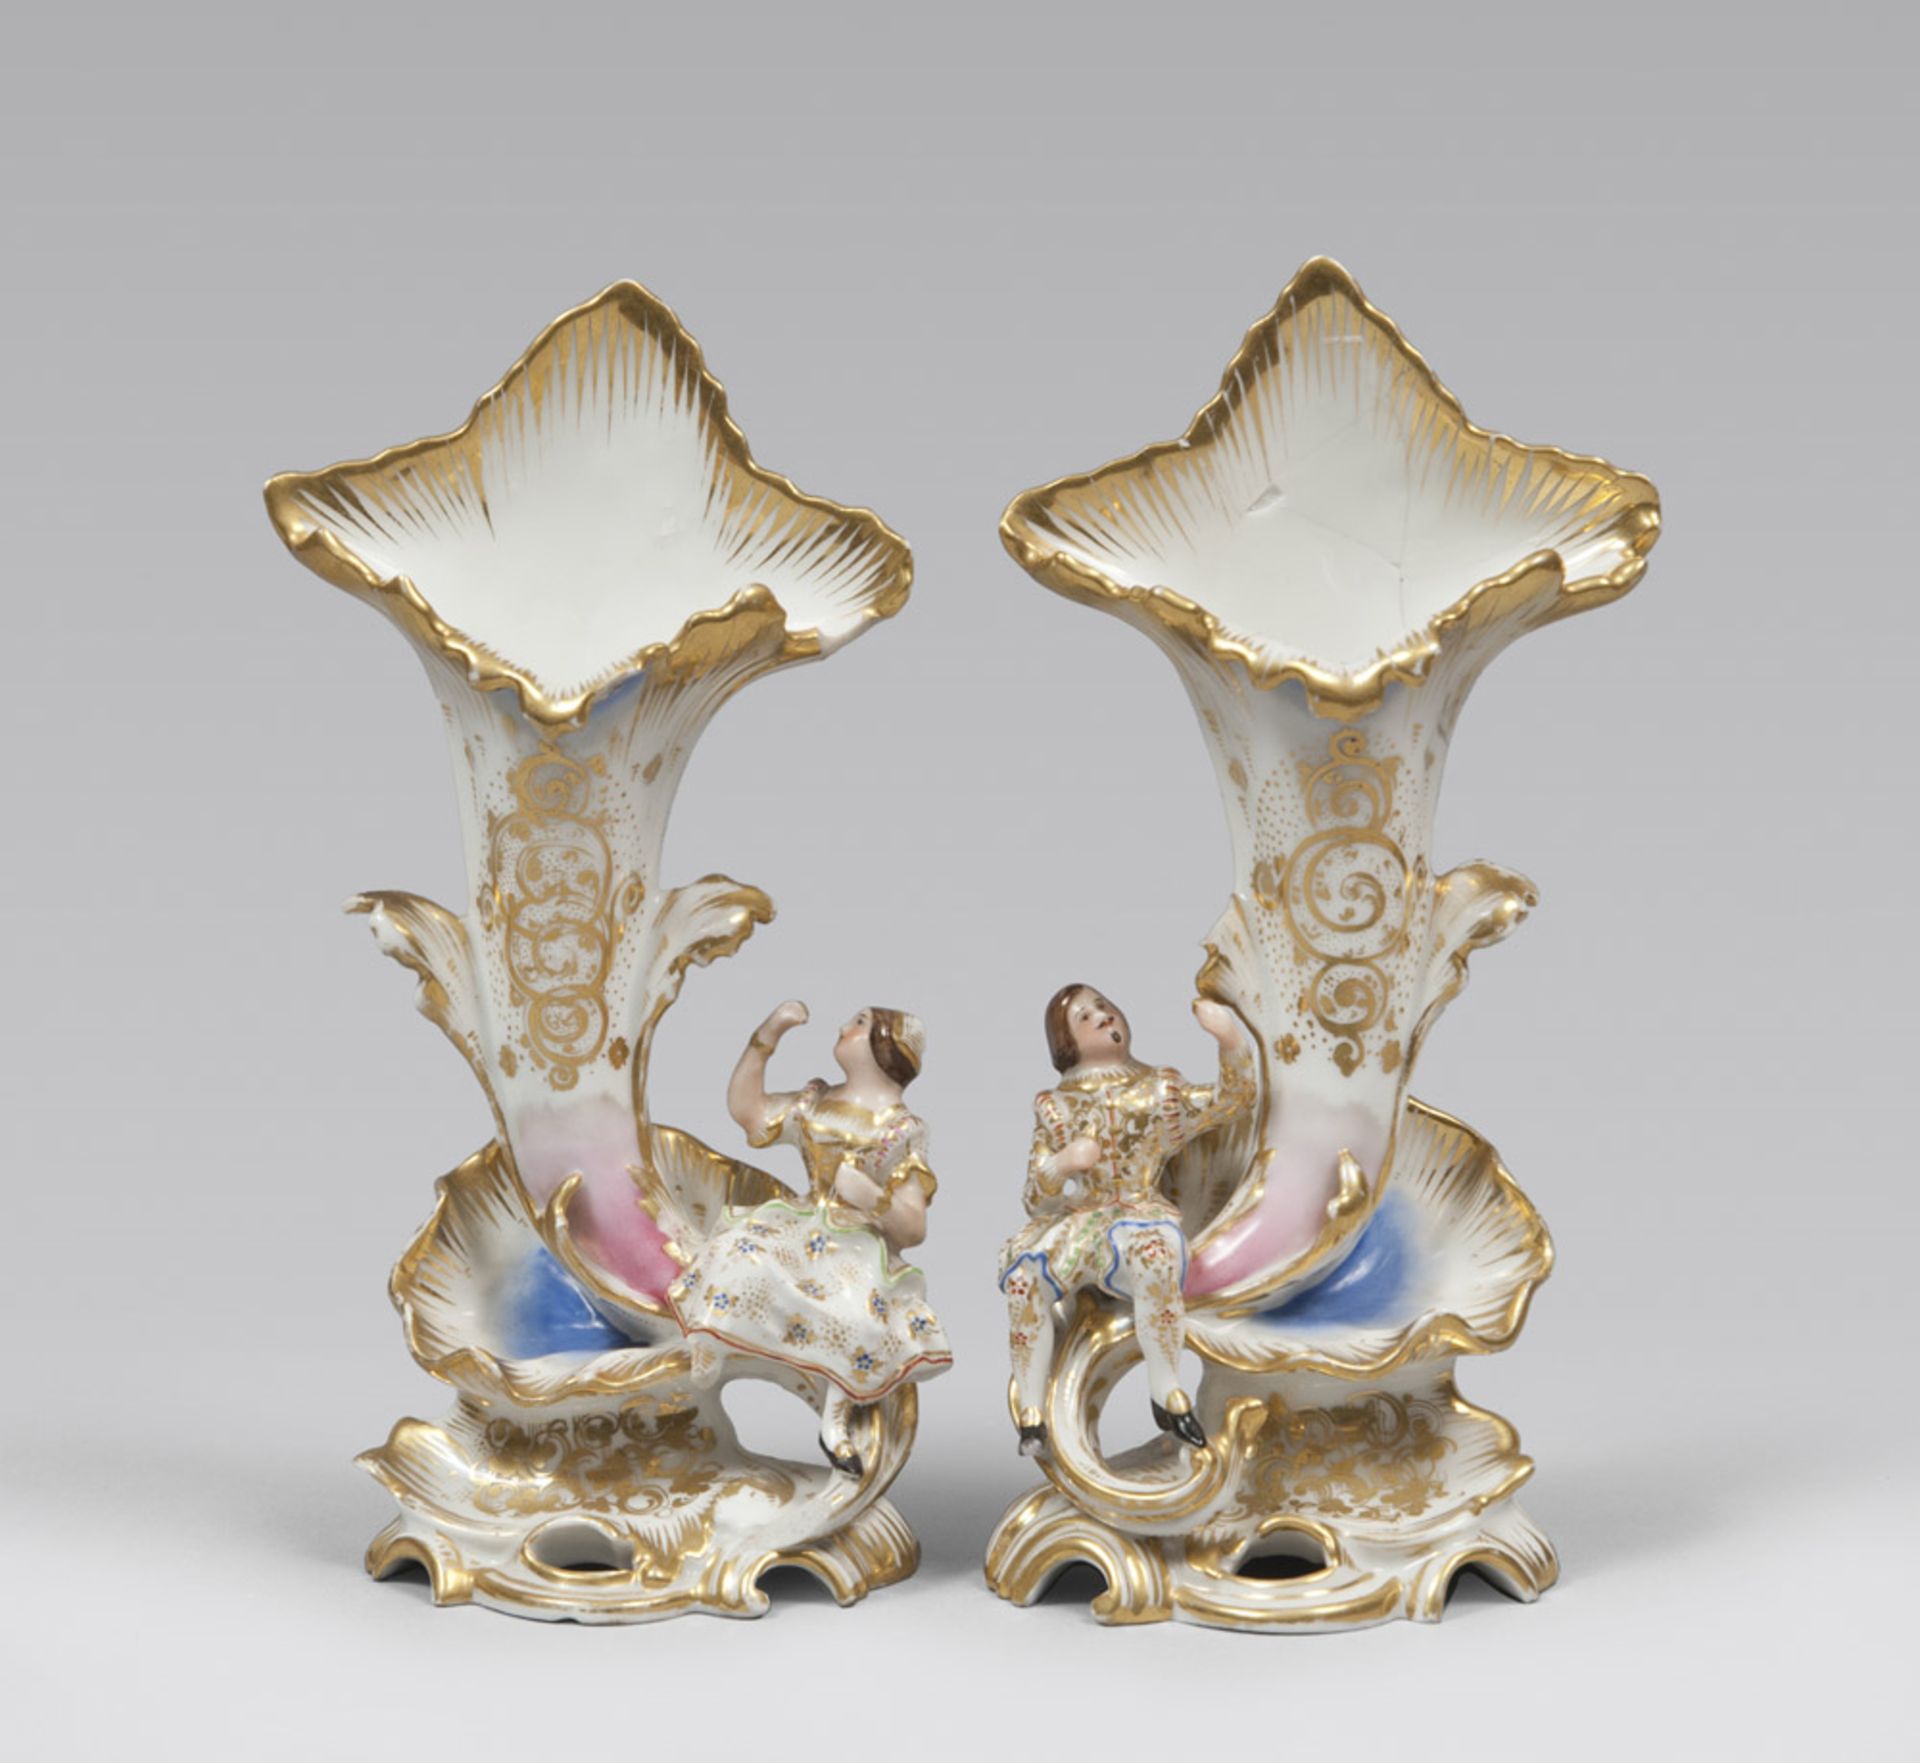 A PAIR OF PORCELAIN POTS – PROBABLY FRANCE 19TH CENTURY